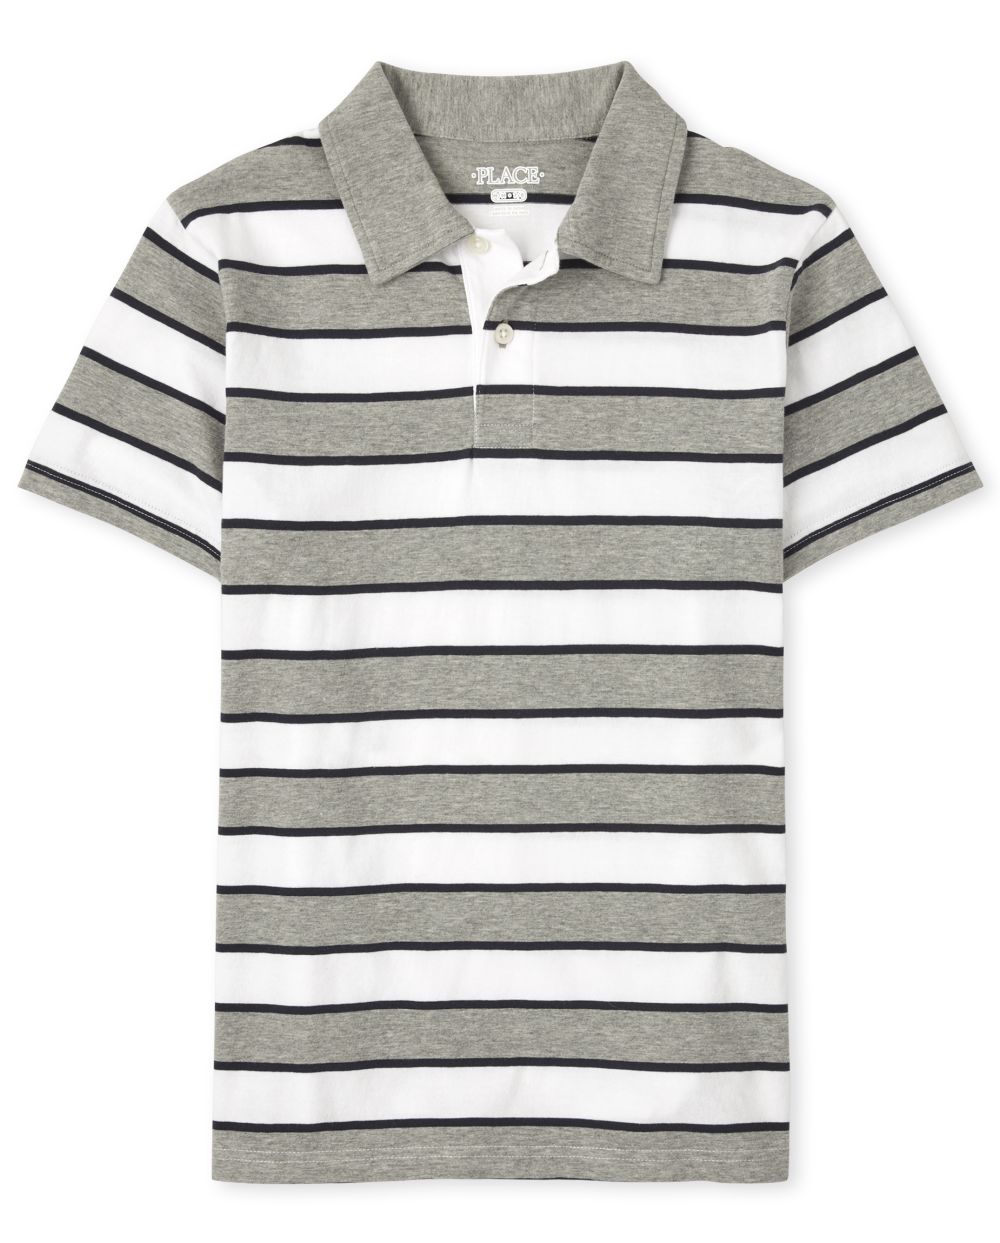 The Children's Place Boys Striped Jersey Polo - Gray - S (5/6)